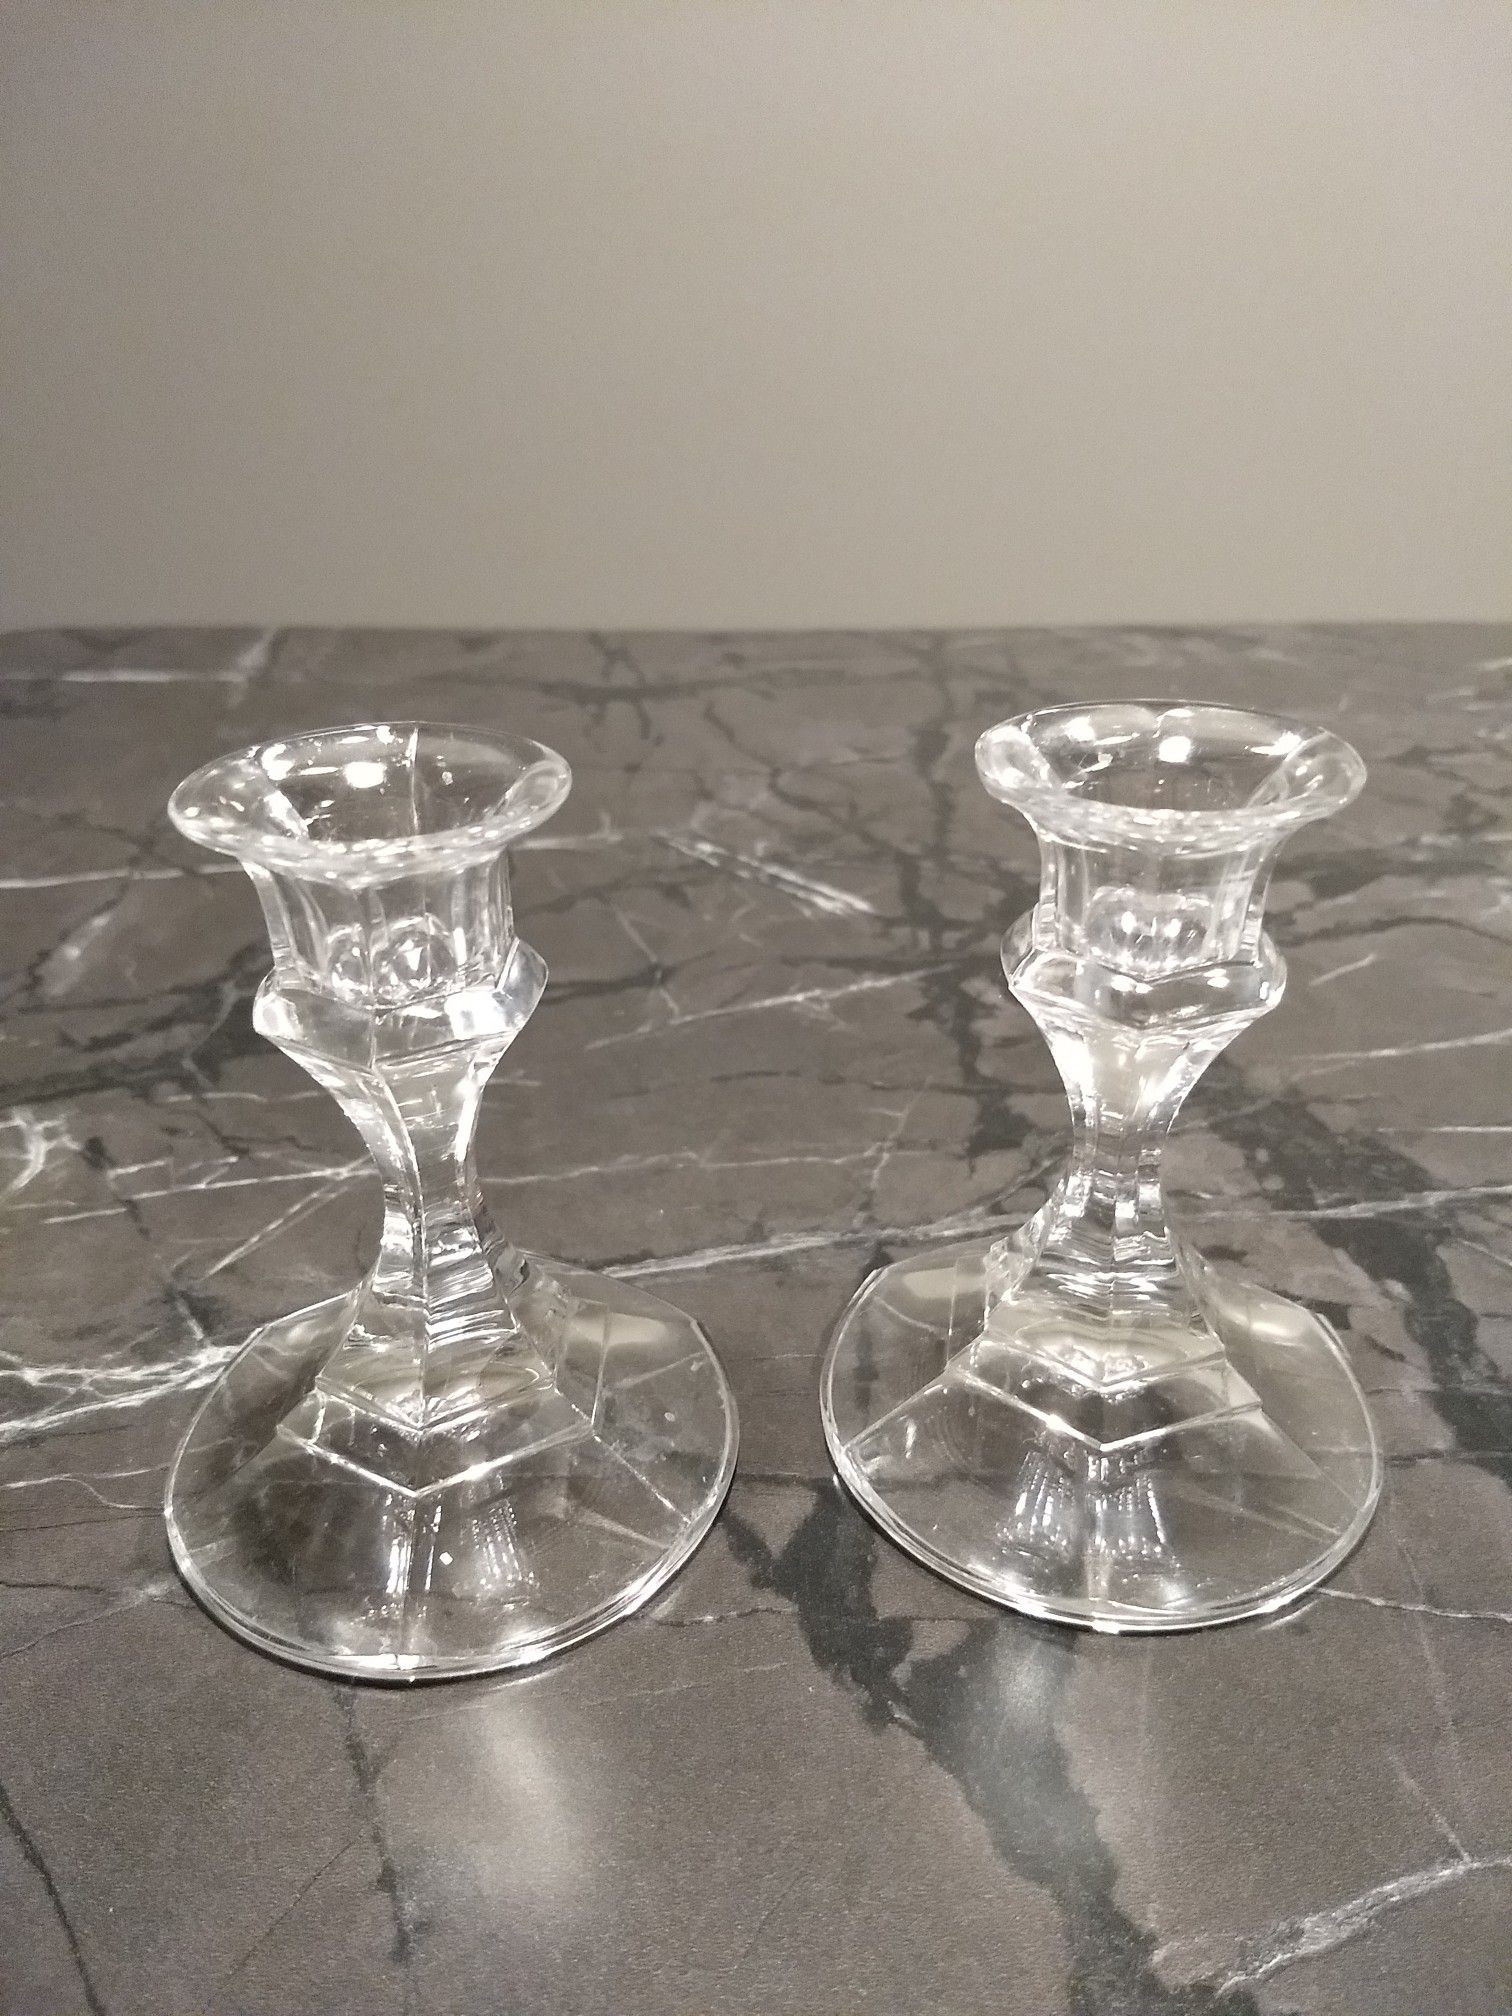 Pair of vintage glass candlestick holders.